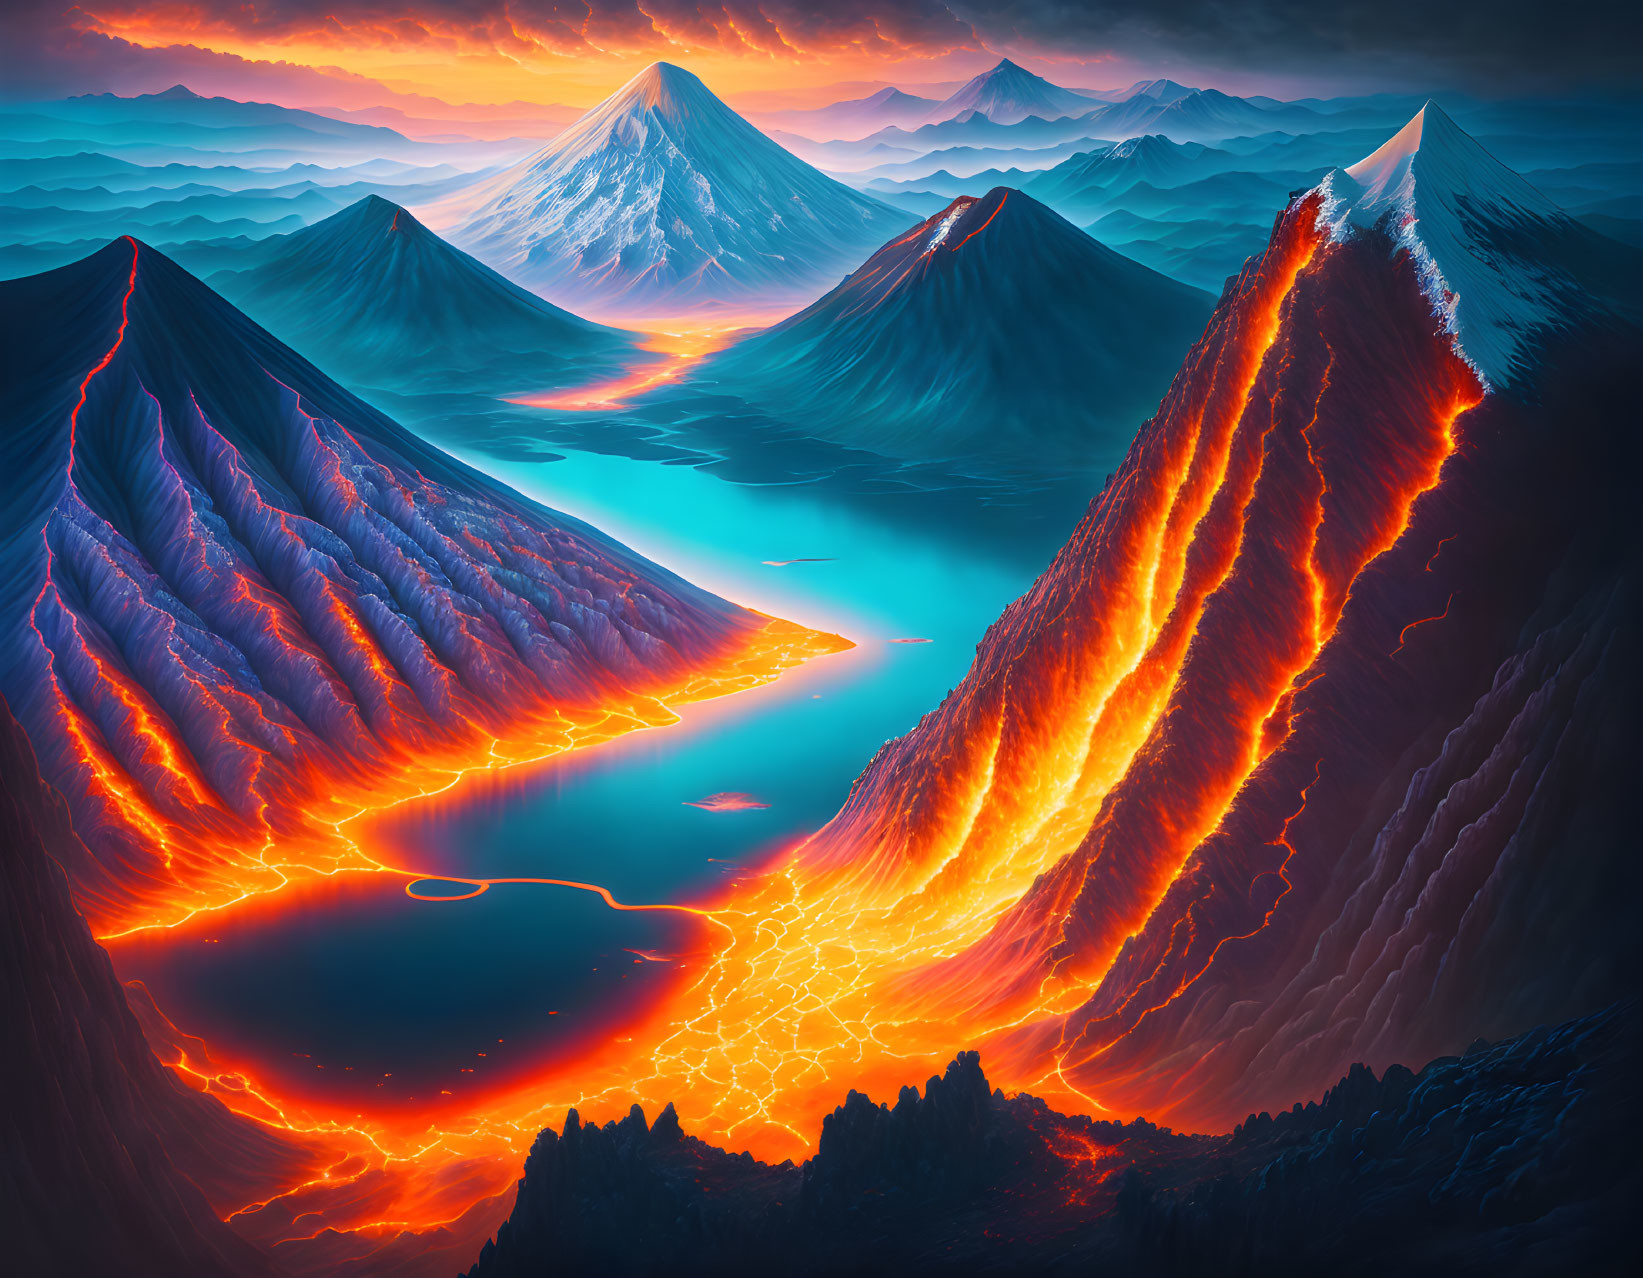 Digital artwork: Dramatic landscape with lava river, snow peaks, blue lake, fiery mountains